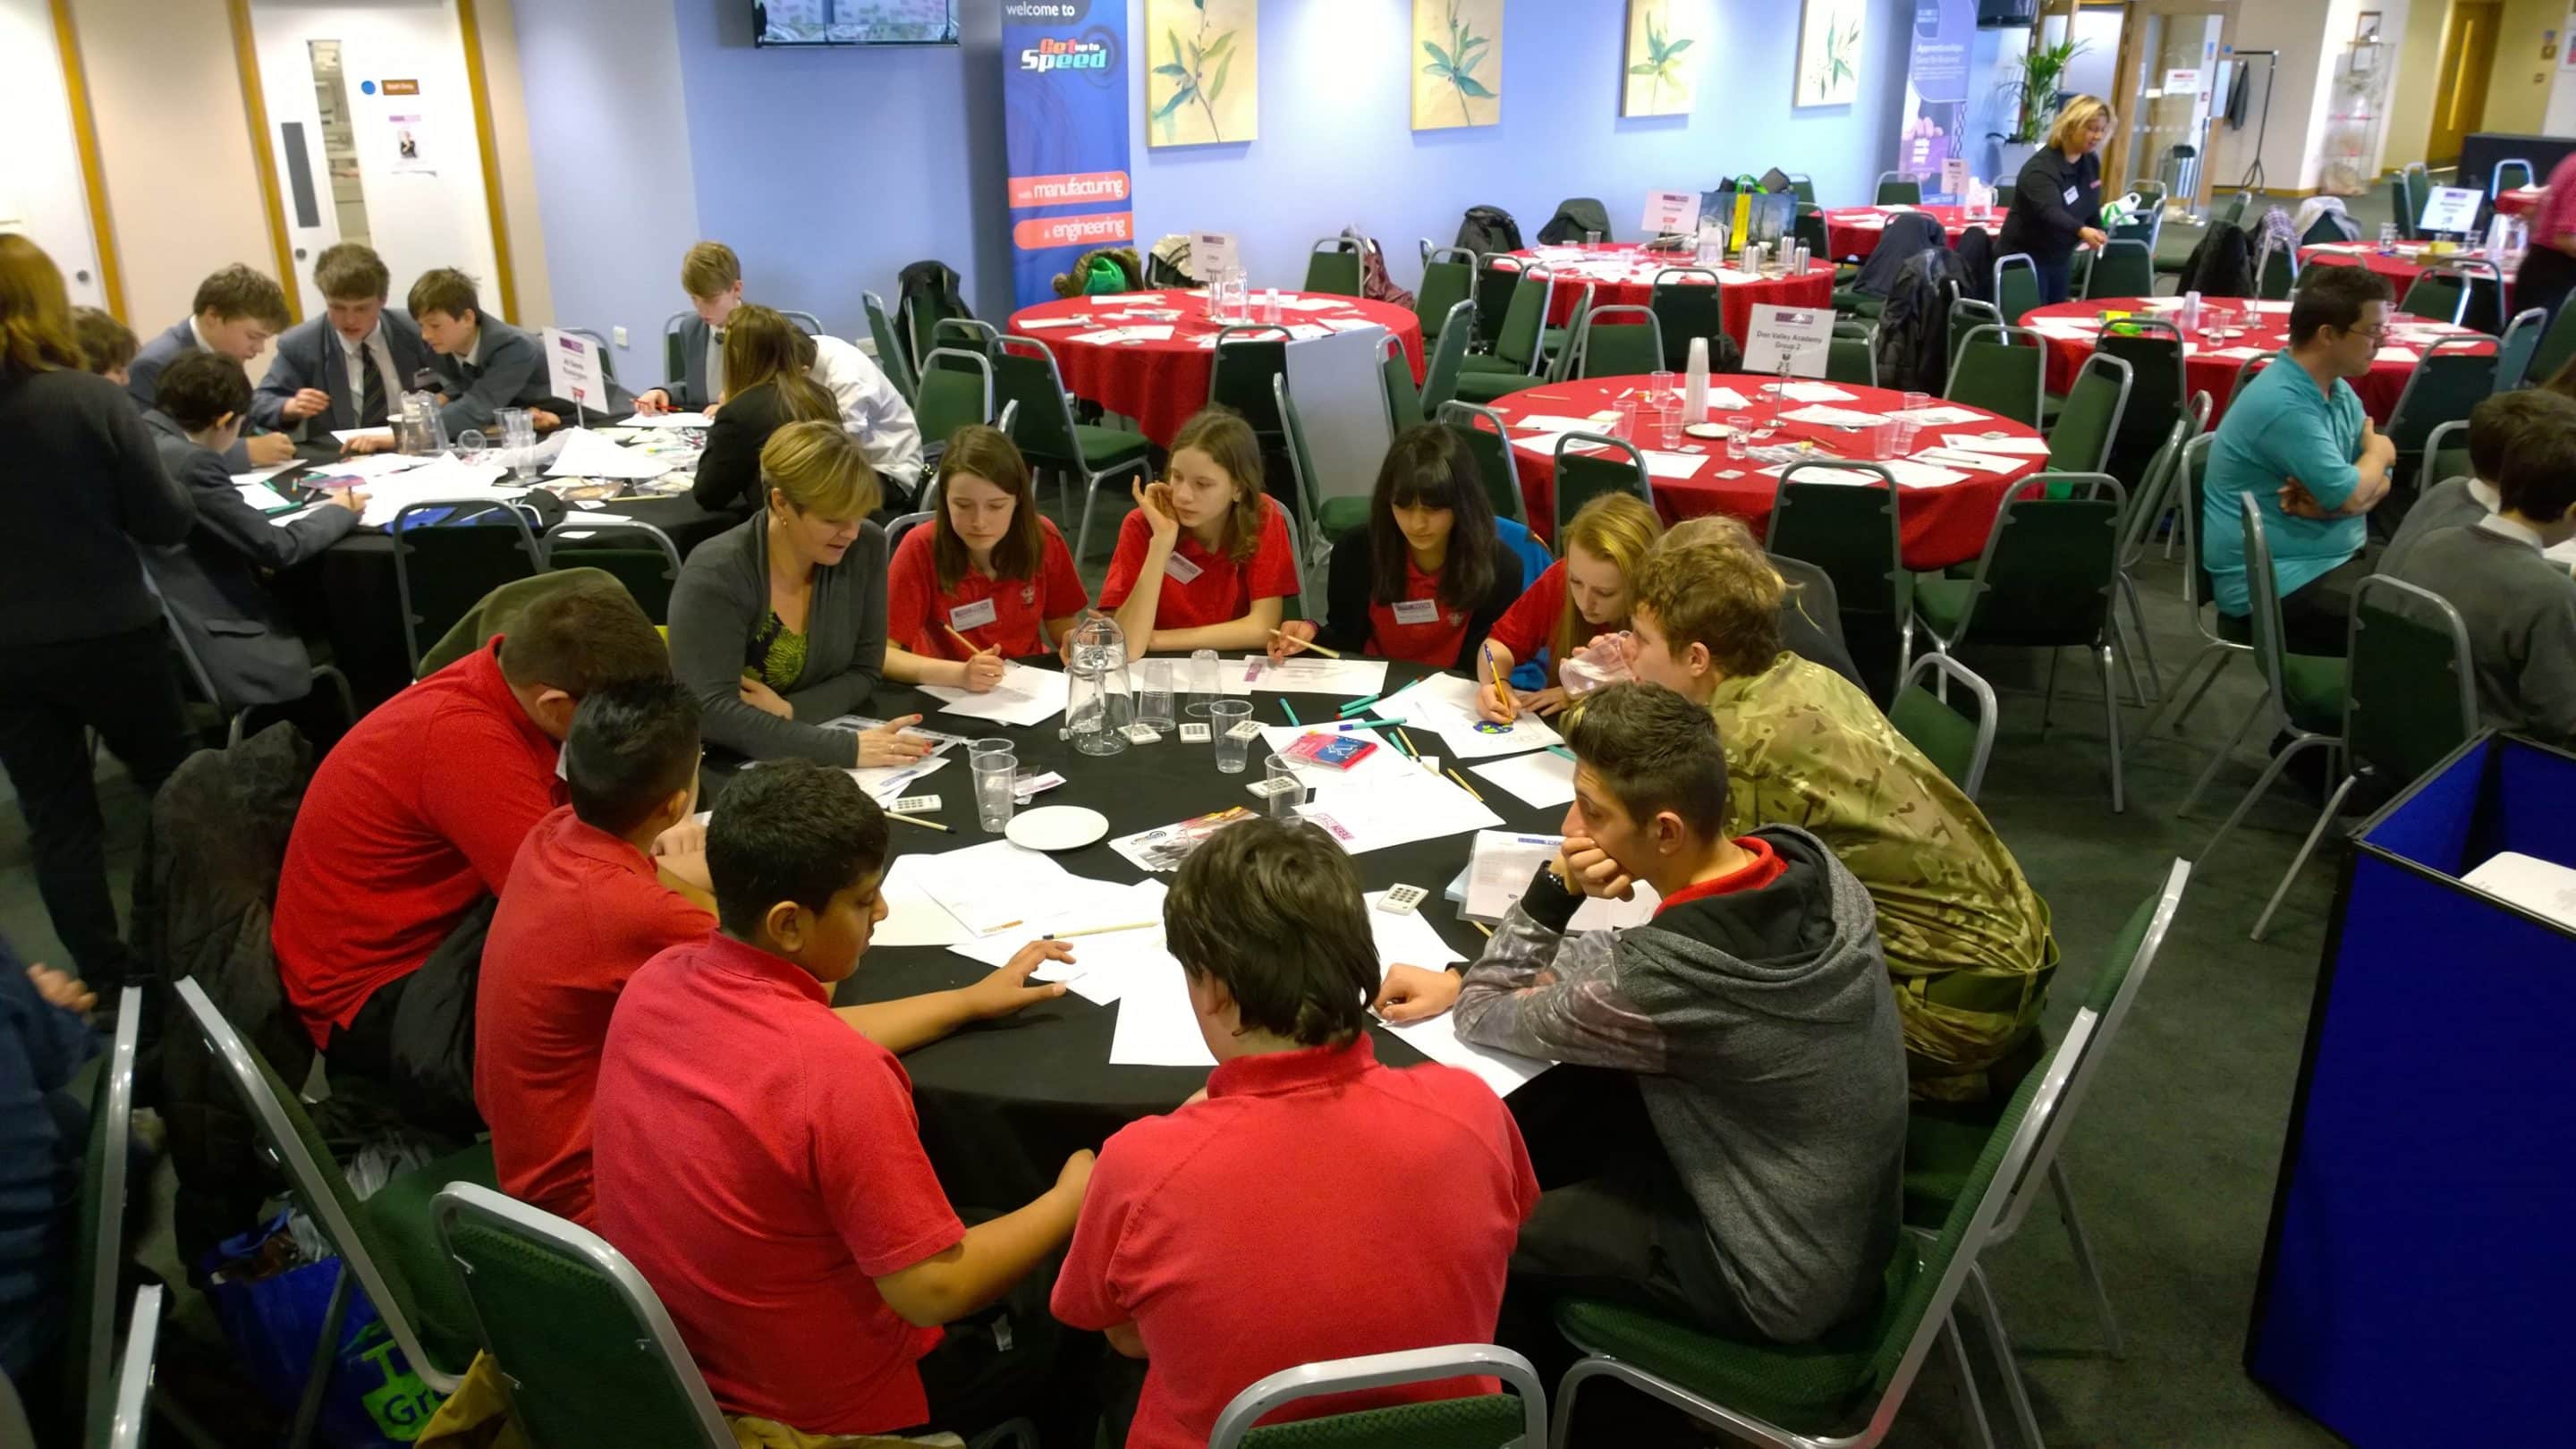 Chaos Created at TeenTech South Yorkshire